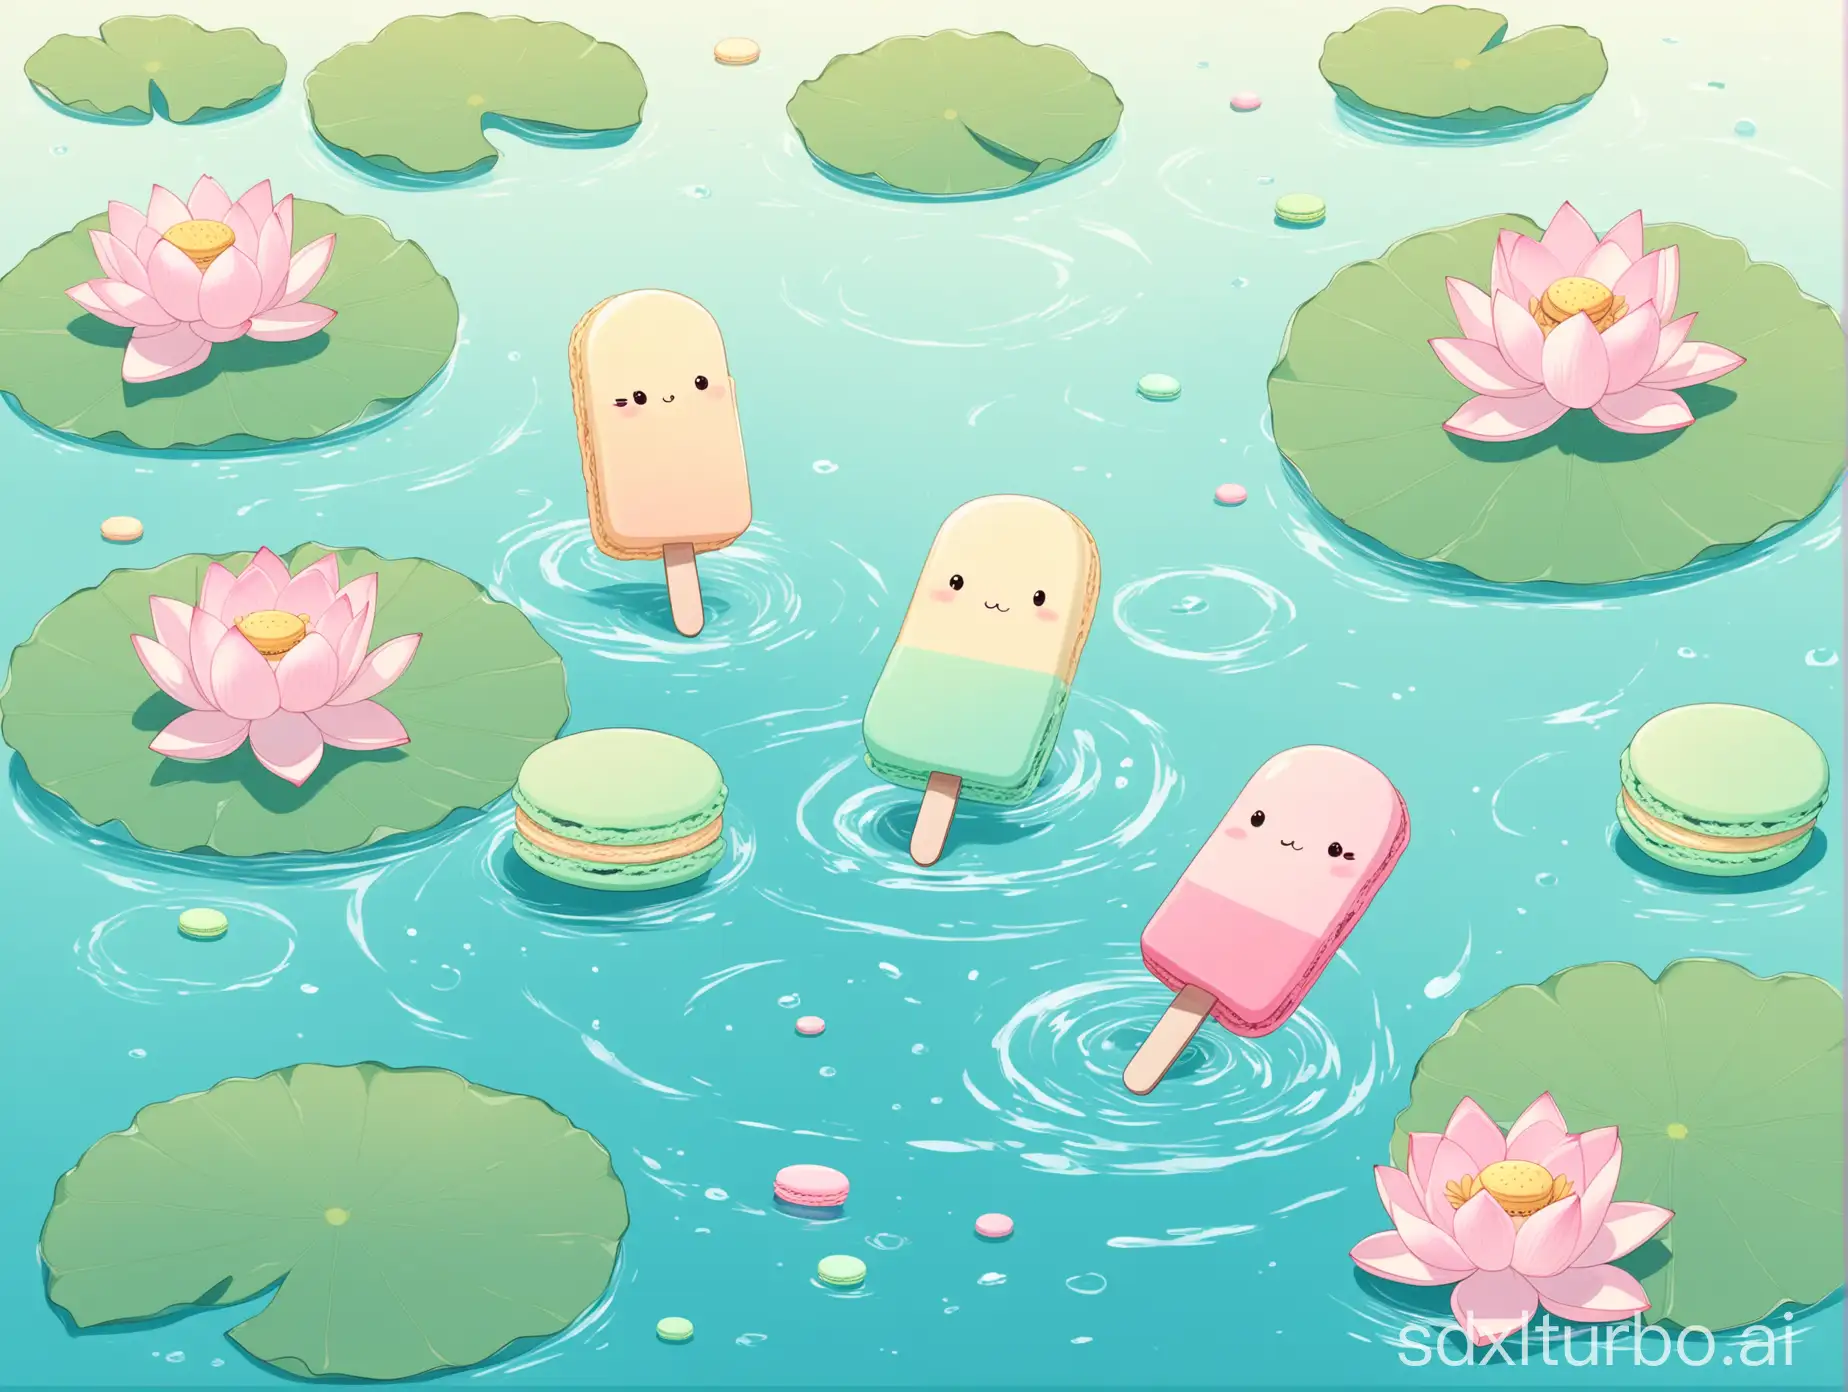 light blue water flow, 3 lotus flowers on it, small lotus leaves, in the middle of the water surface there is an adorable popsicle, cartoon style, macaron color scheme, delicate and cute painting style